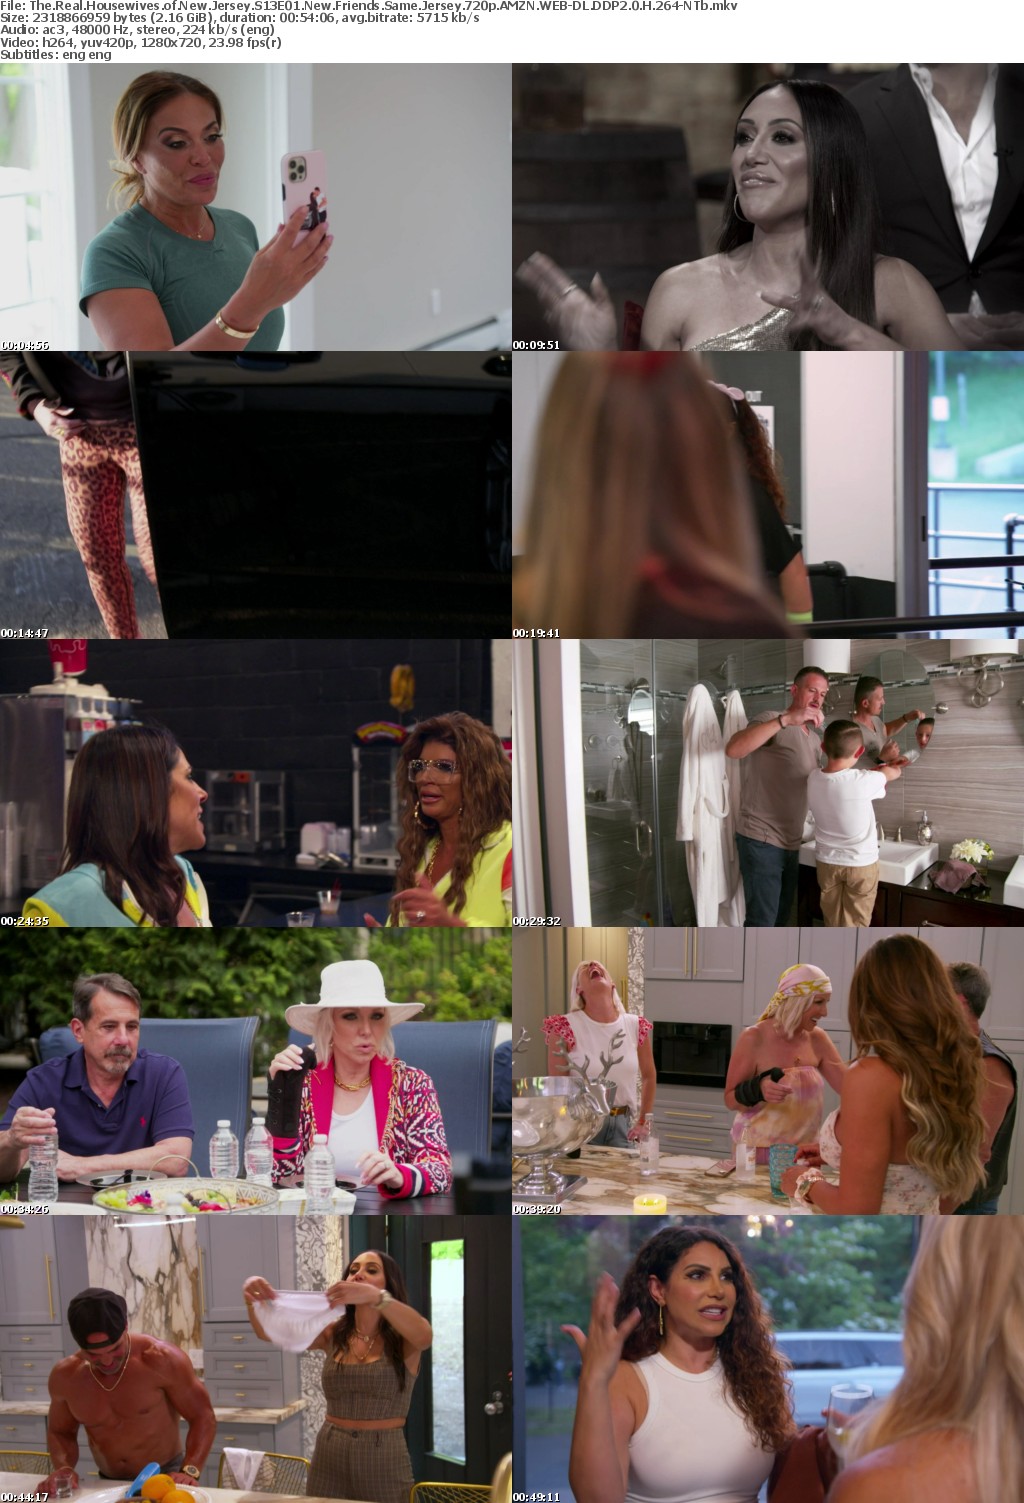 The Real Housewives of New Jersey S13E01 New Friends Same Jersey 720p AMZN WEBRip DDP2 0 x264-NTb